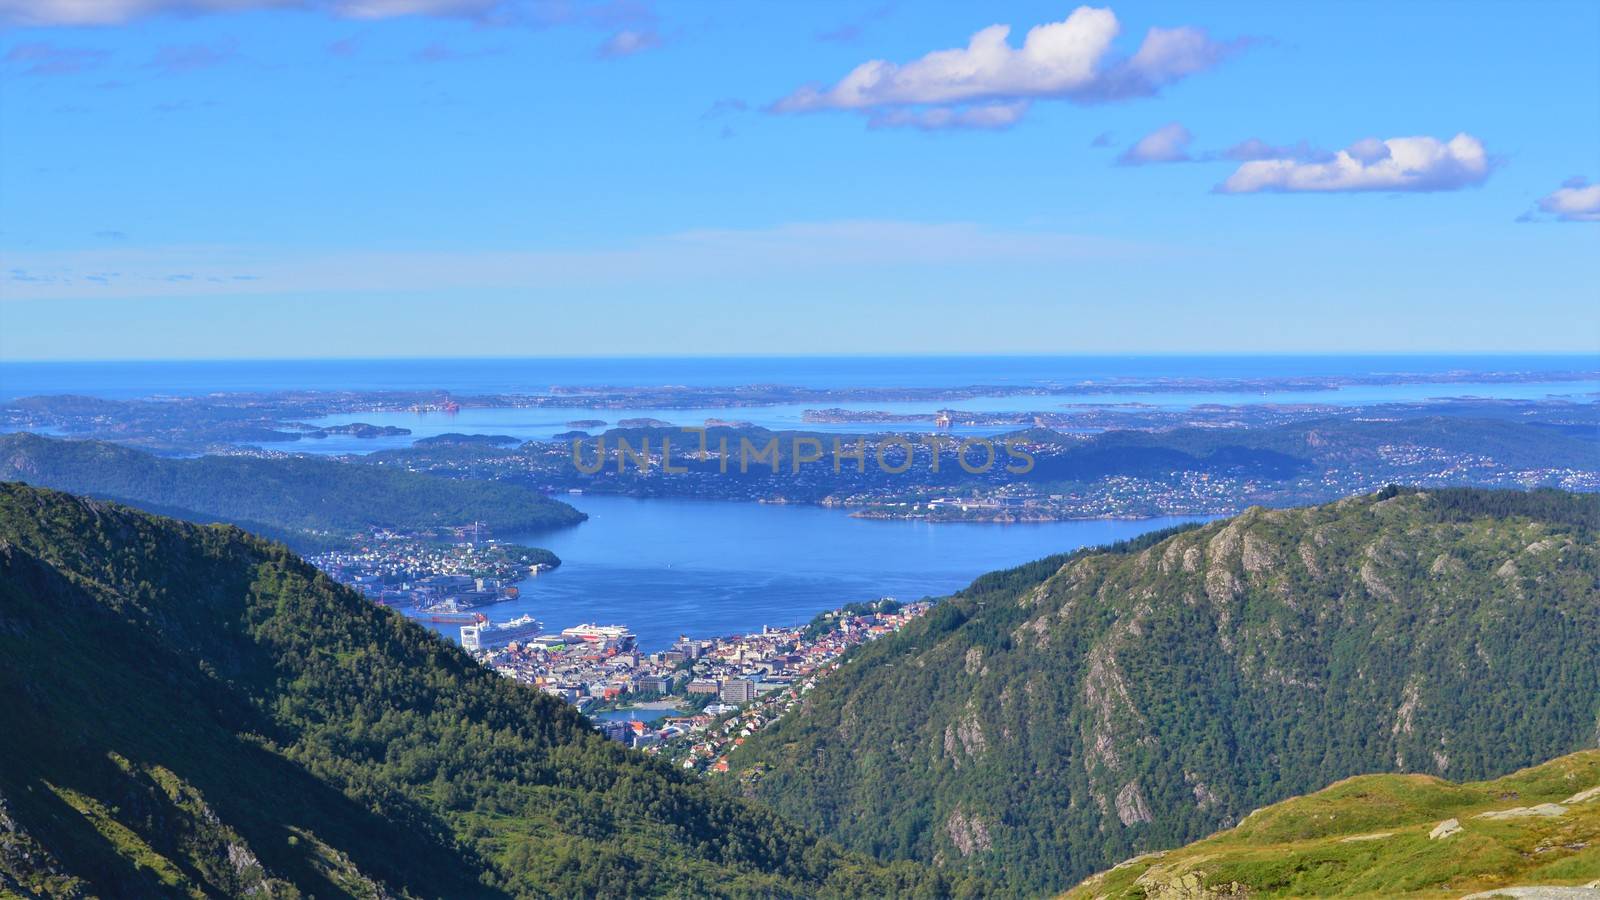 Beautiful countryside from Norway's west coast, close to the city of Bergen.